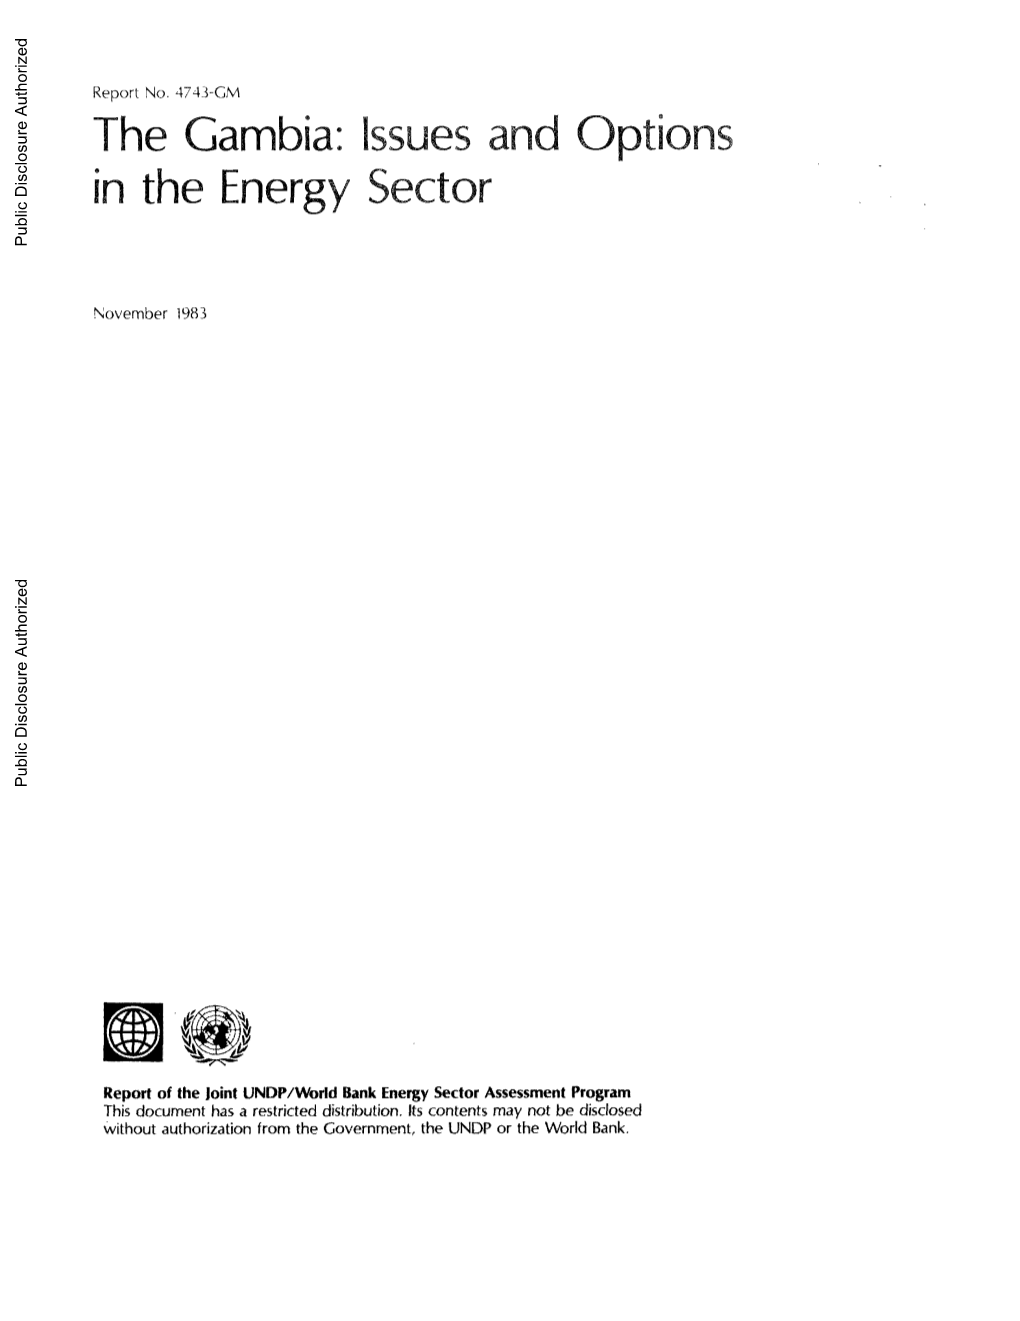 The Gambia: Issues and Options in the Energy Sector Public Disclosure Authorized